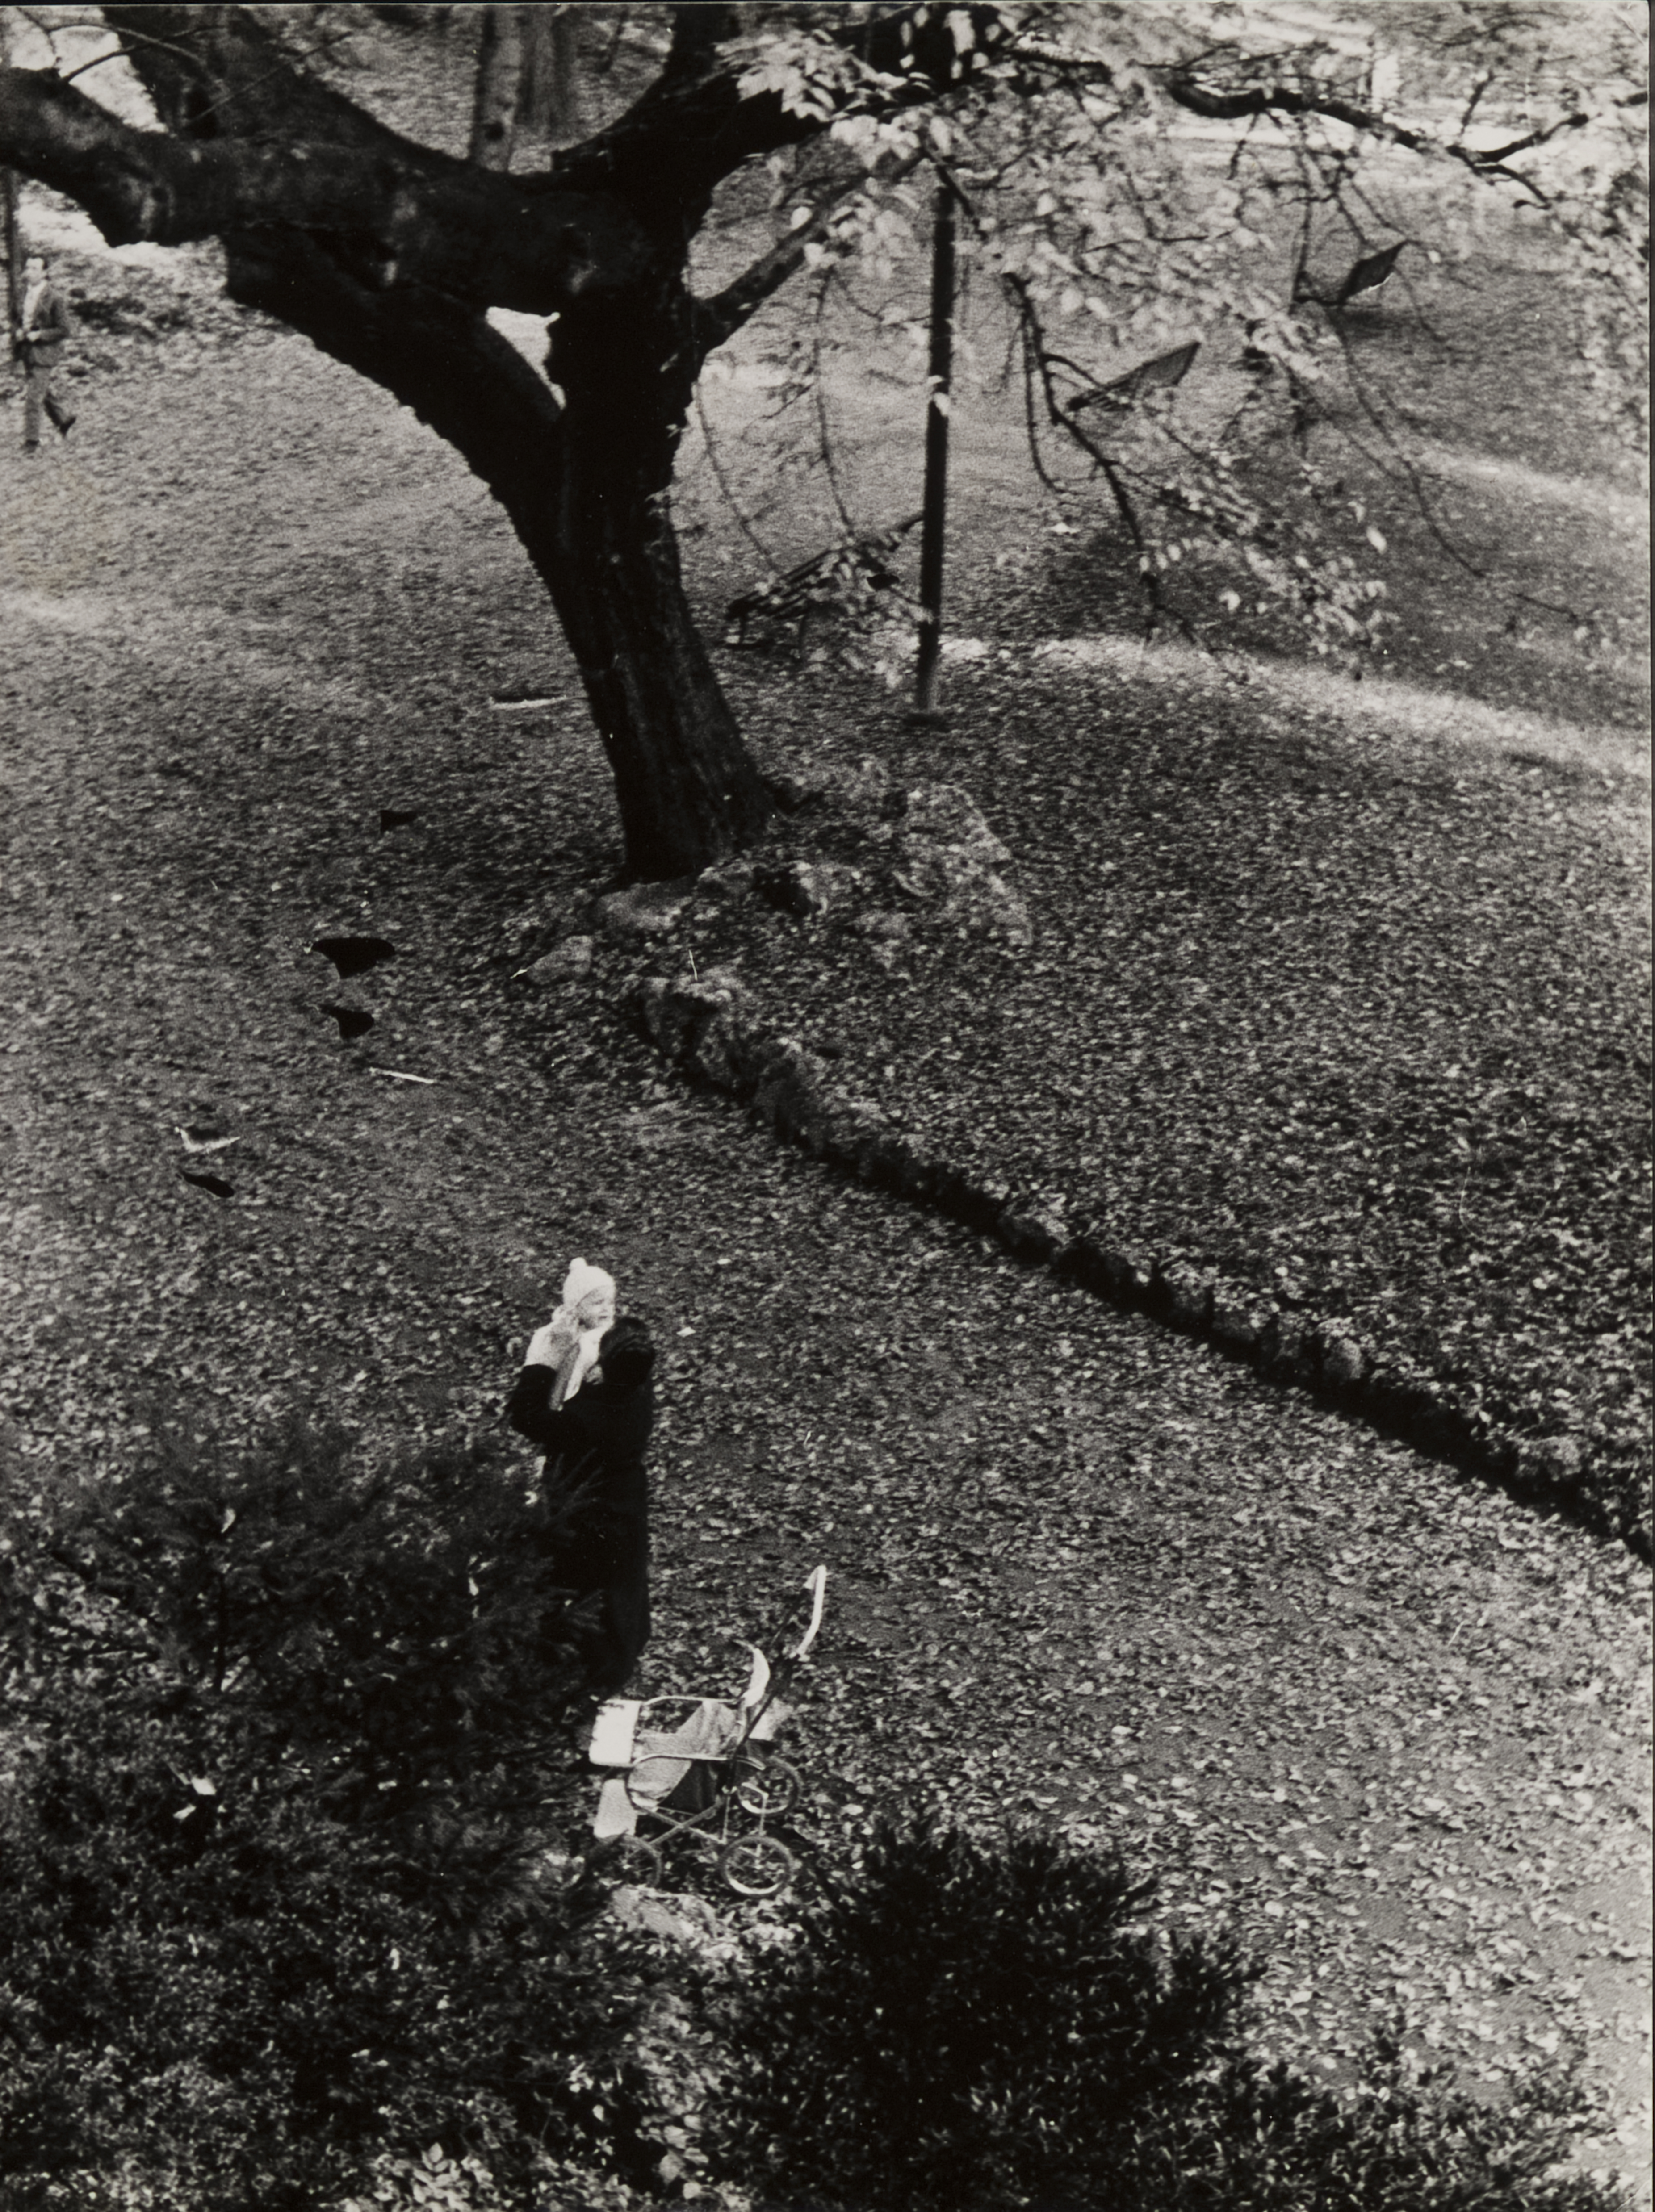 Overhead view of woman holding baby, carriage in foreground, tree behind